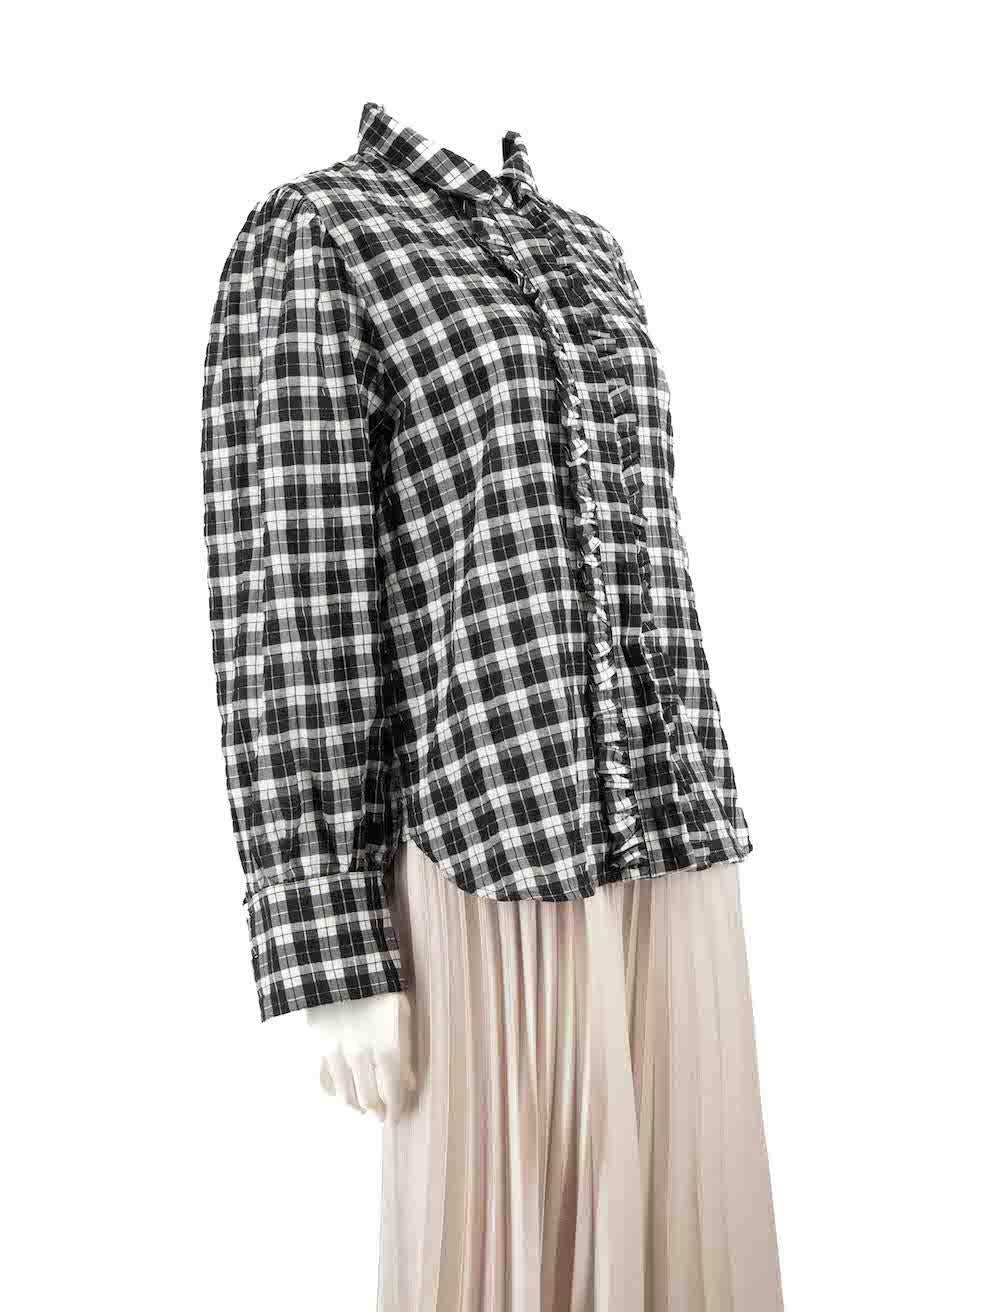 CONDITION is Very good. Hardly any visible wear to shirt is evident on this used Ganni designer resale item.
 
 Details
 Black
 Cotton
 Long sleeves blouse
 Checkered pattern
 Slightly sheer
 Ruffles detail
 Front button up closure
 Buttoned cuffs
